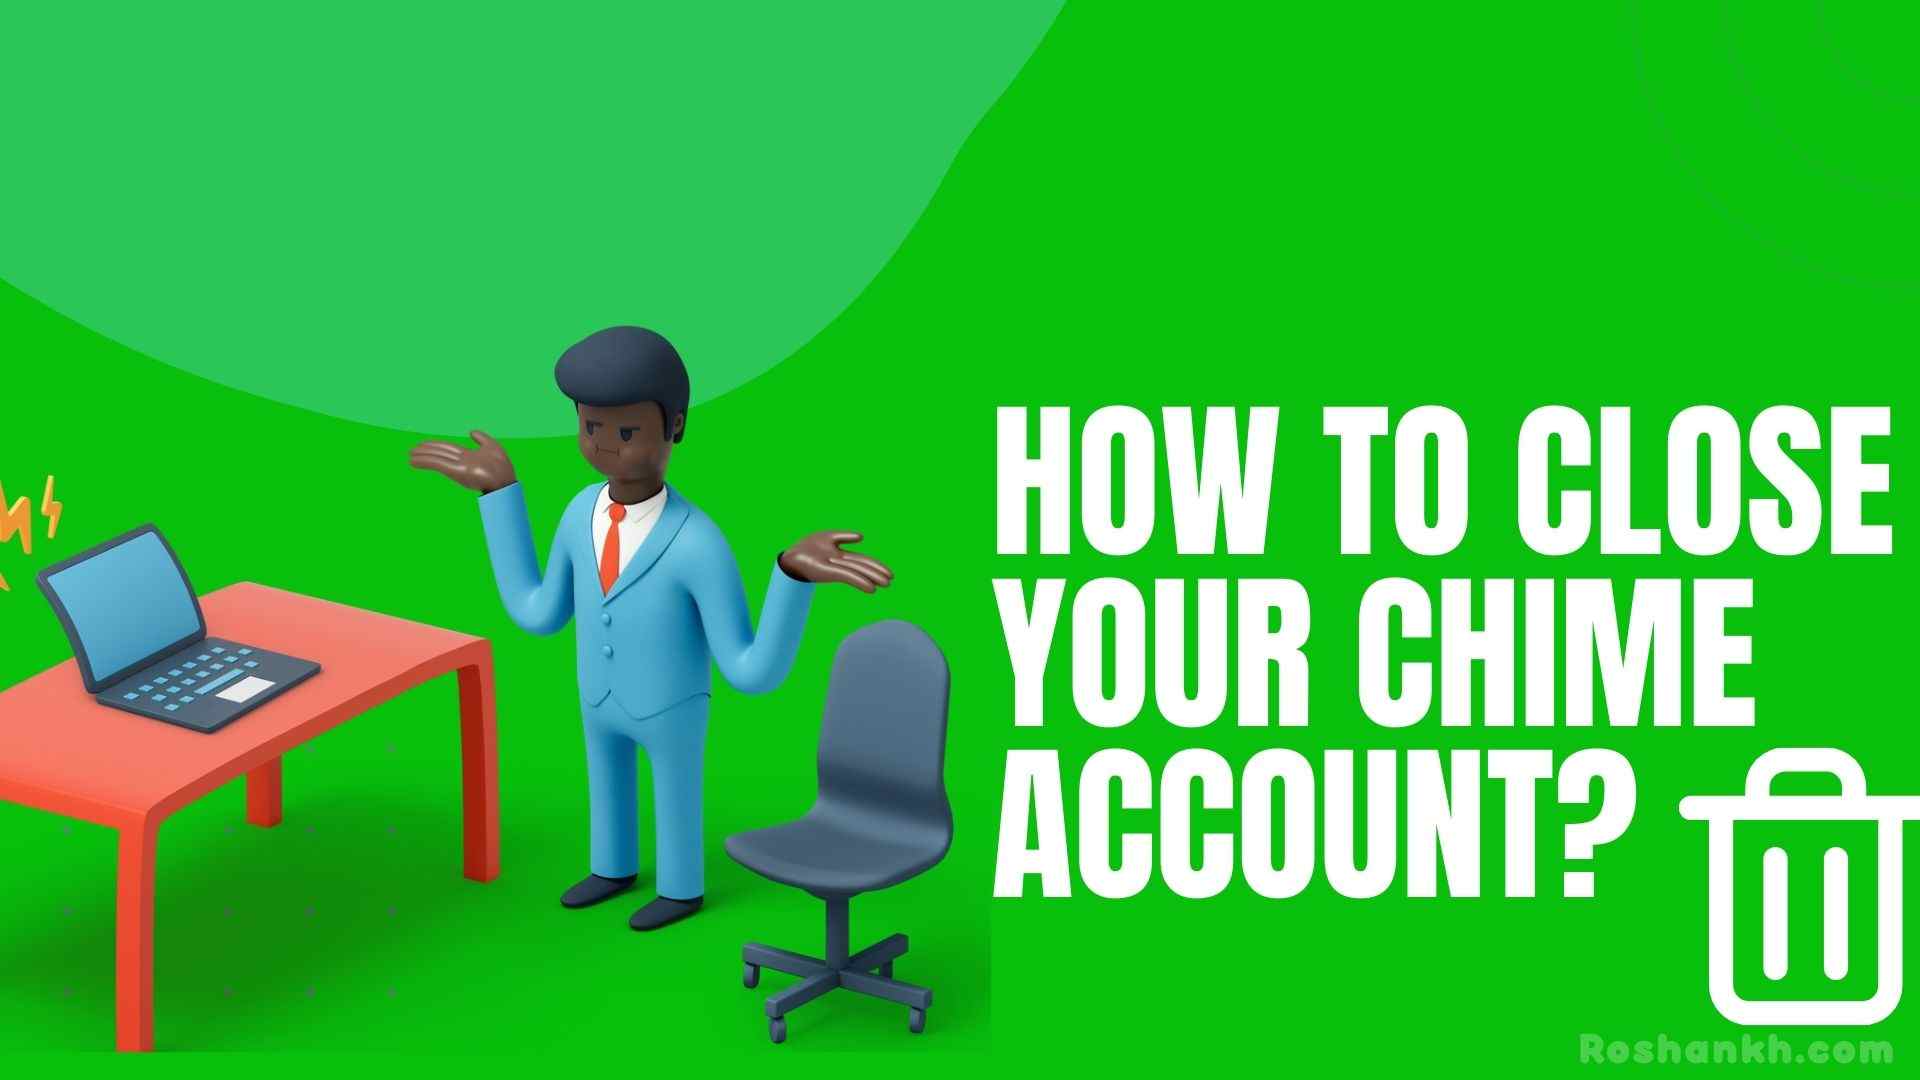 How To Close Your Chime Account?